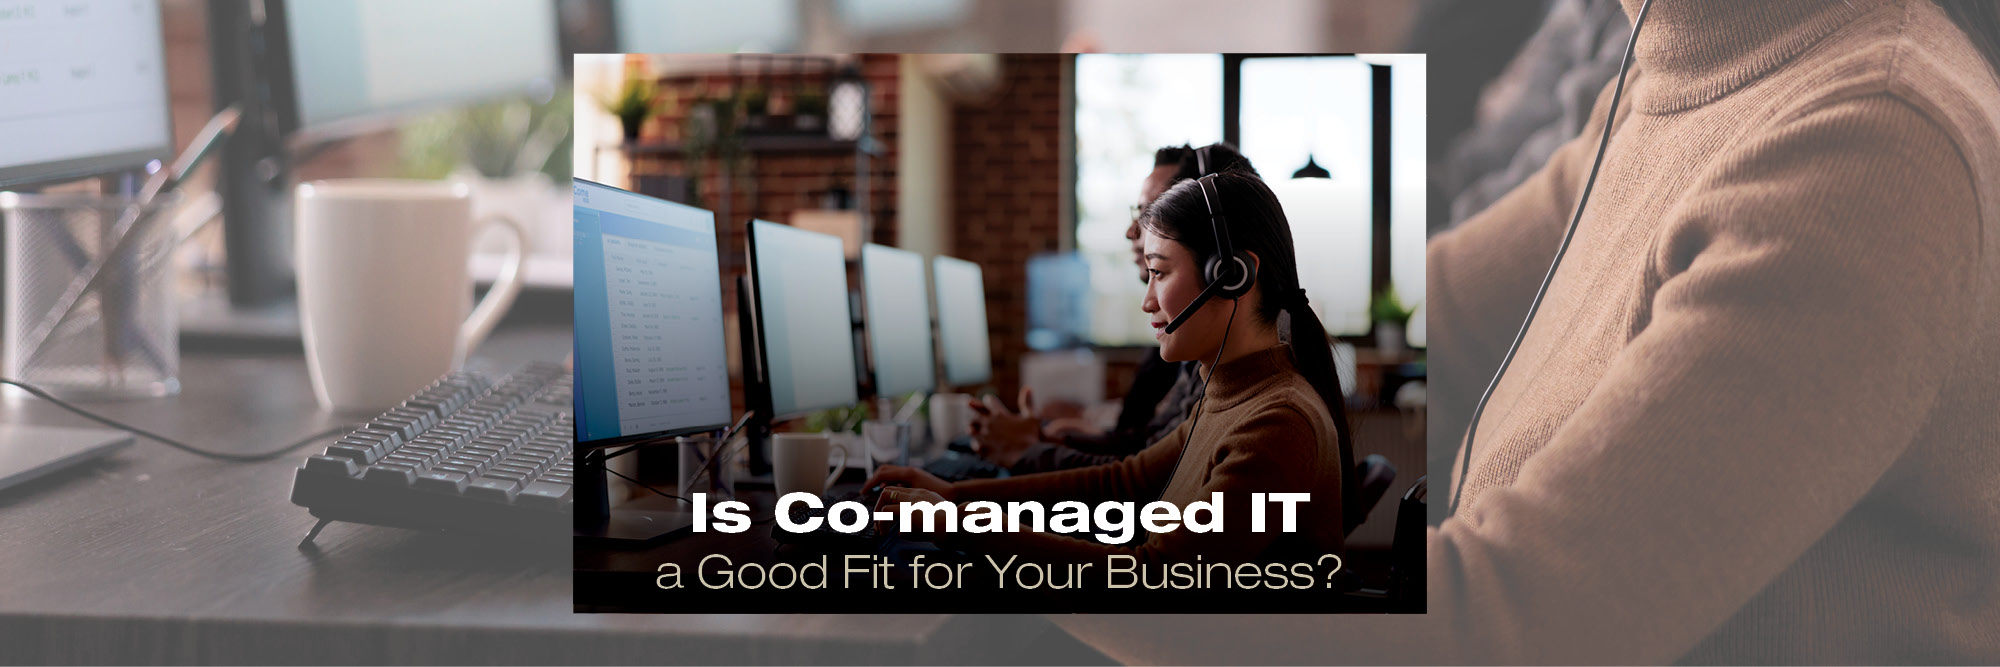 Is Co-managed IT a Good Fit for Your Business?